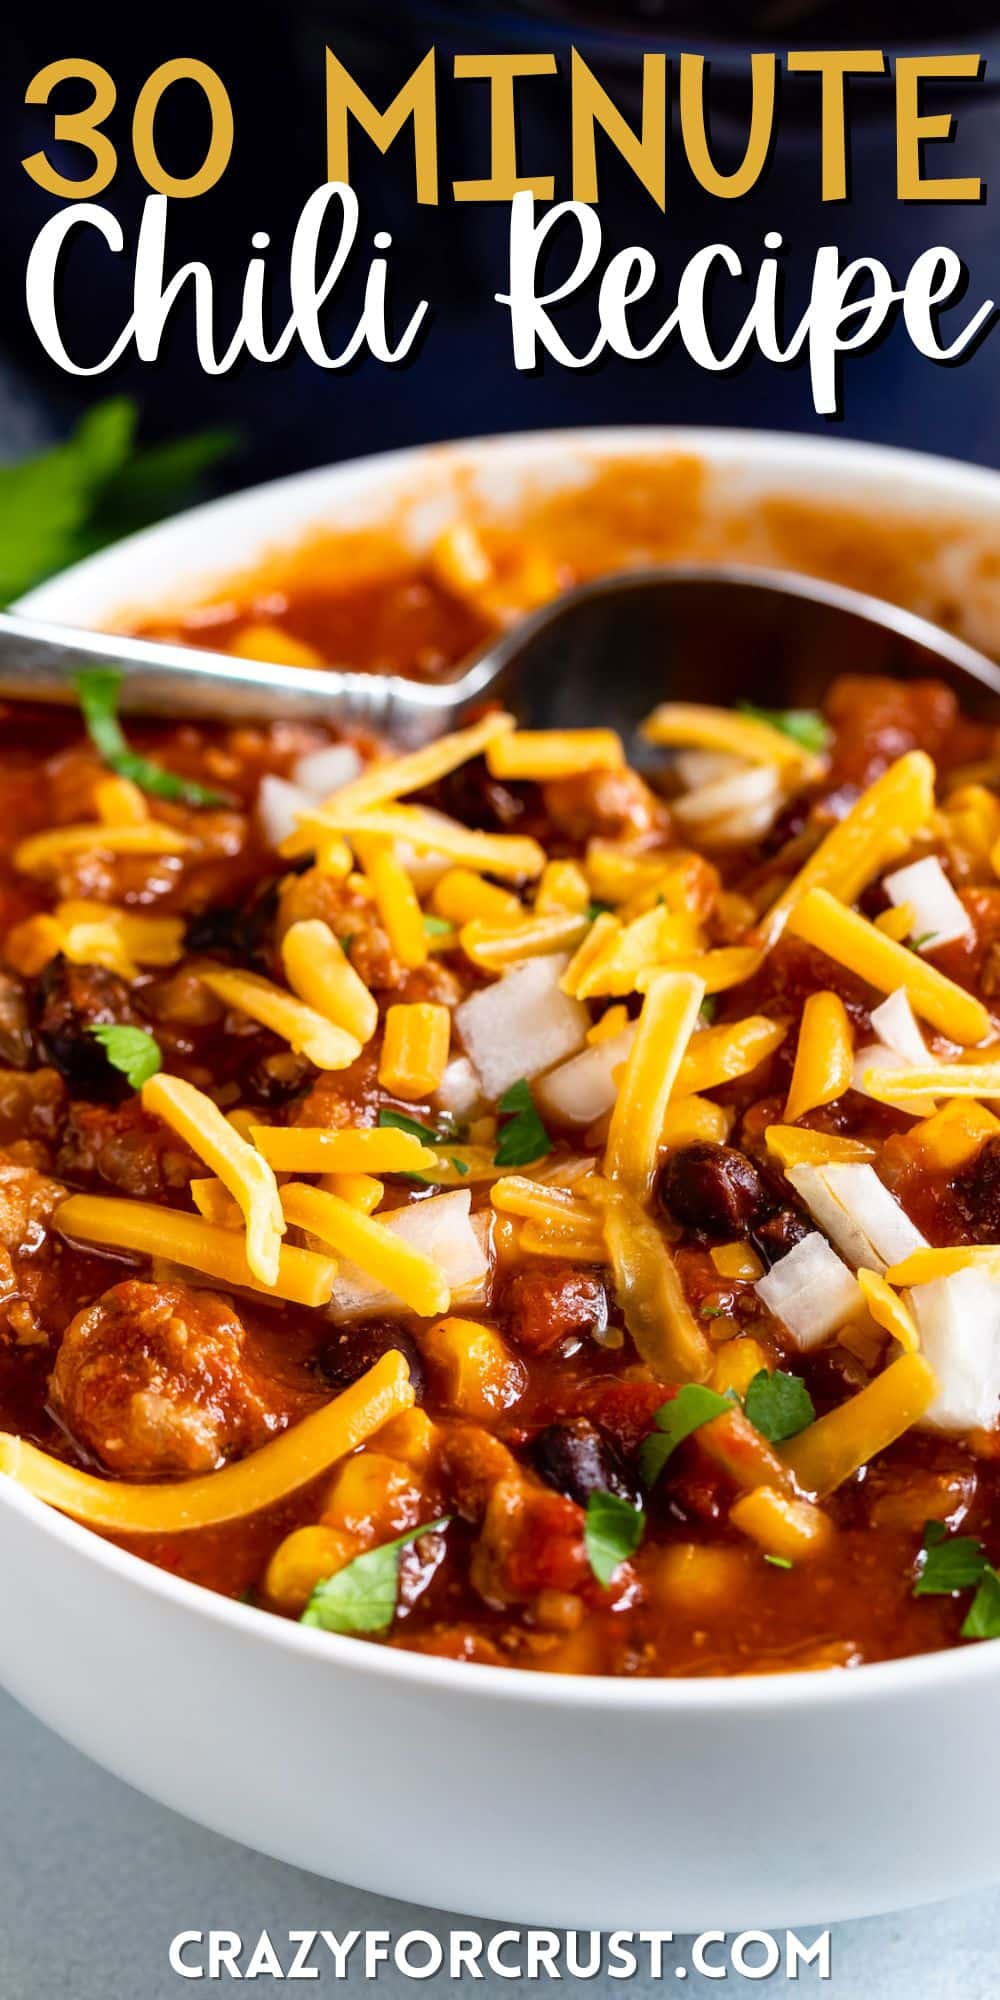 chili recipe with cheese on top in a white bowl with words on the image.